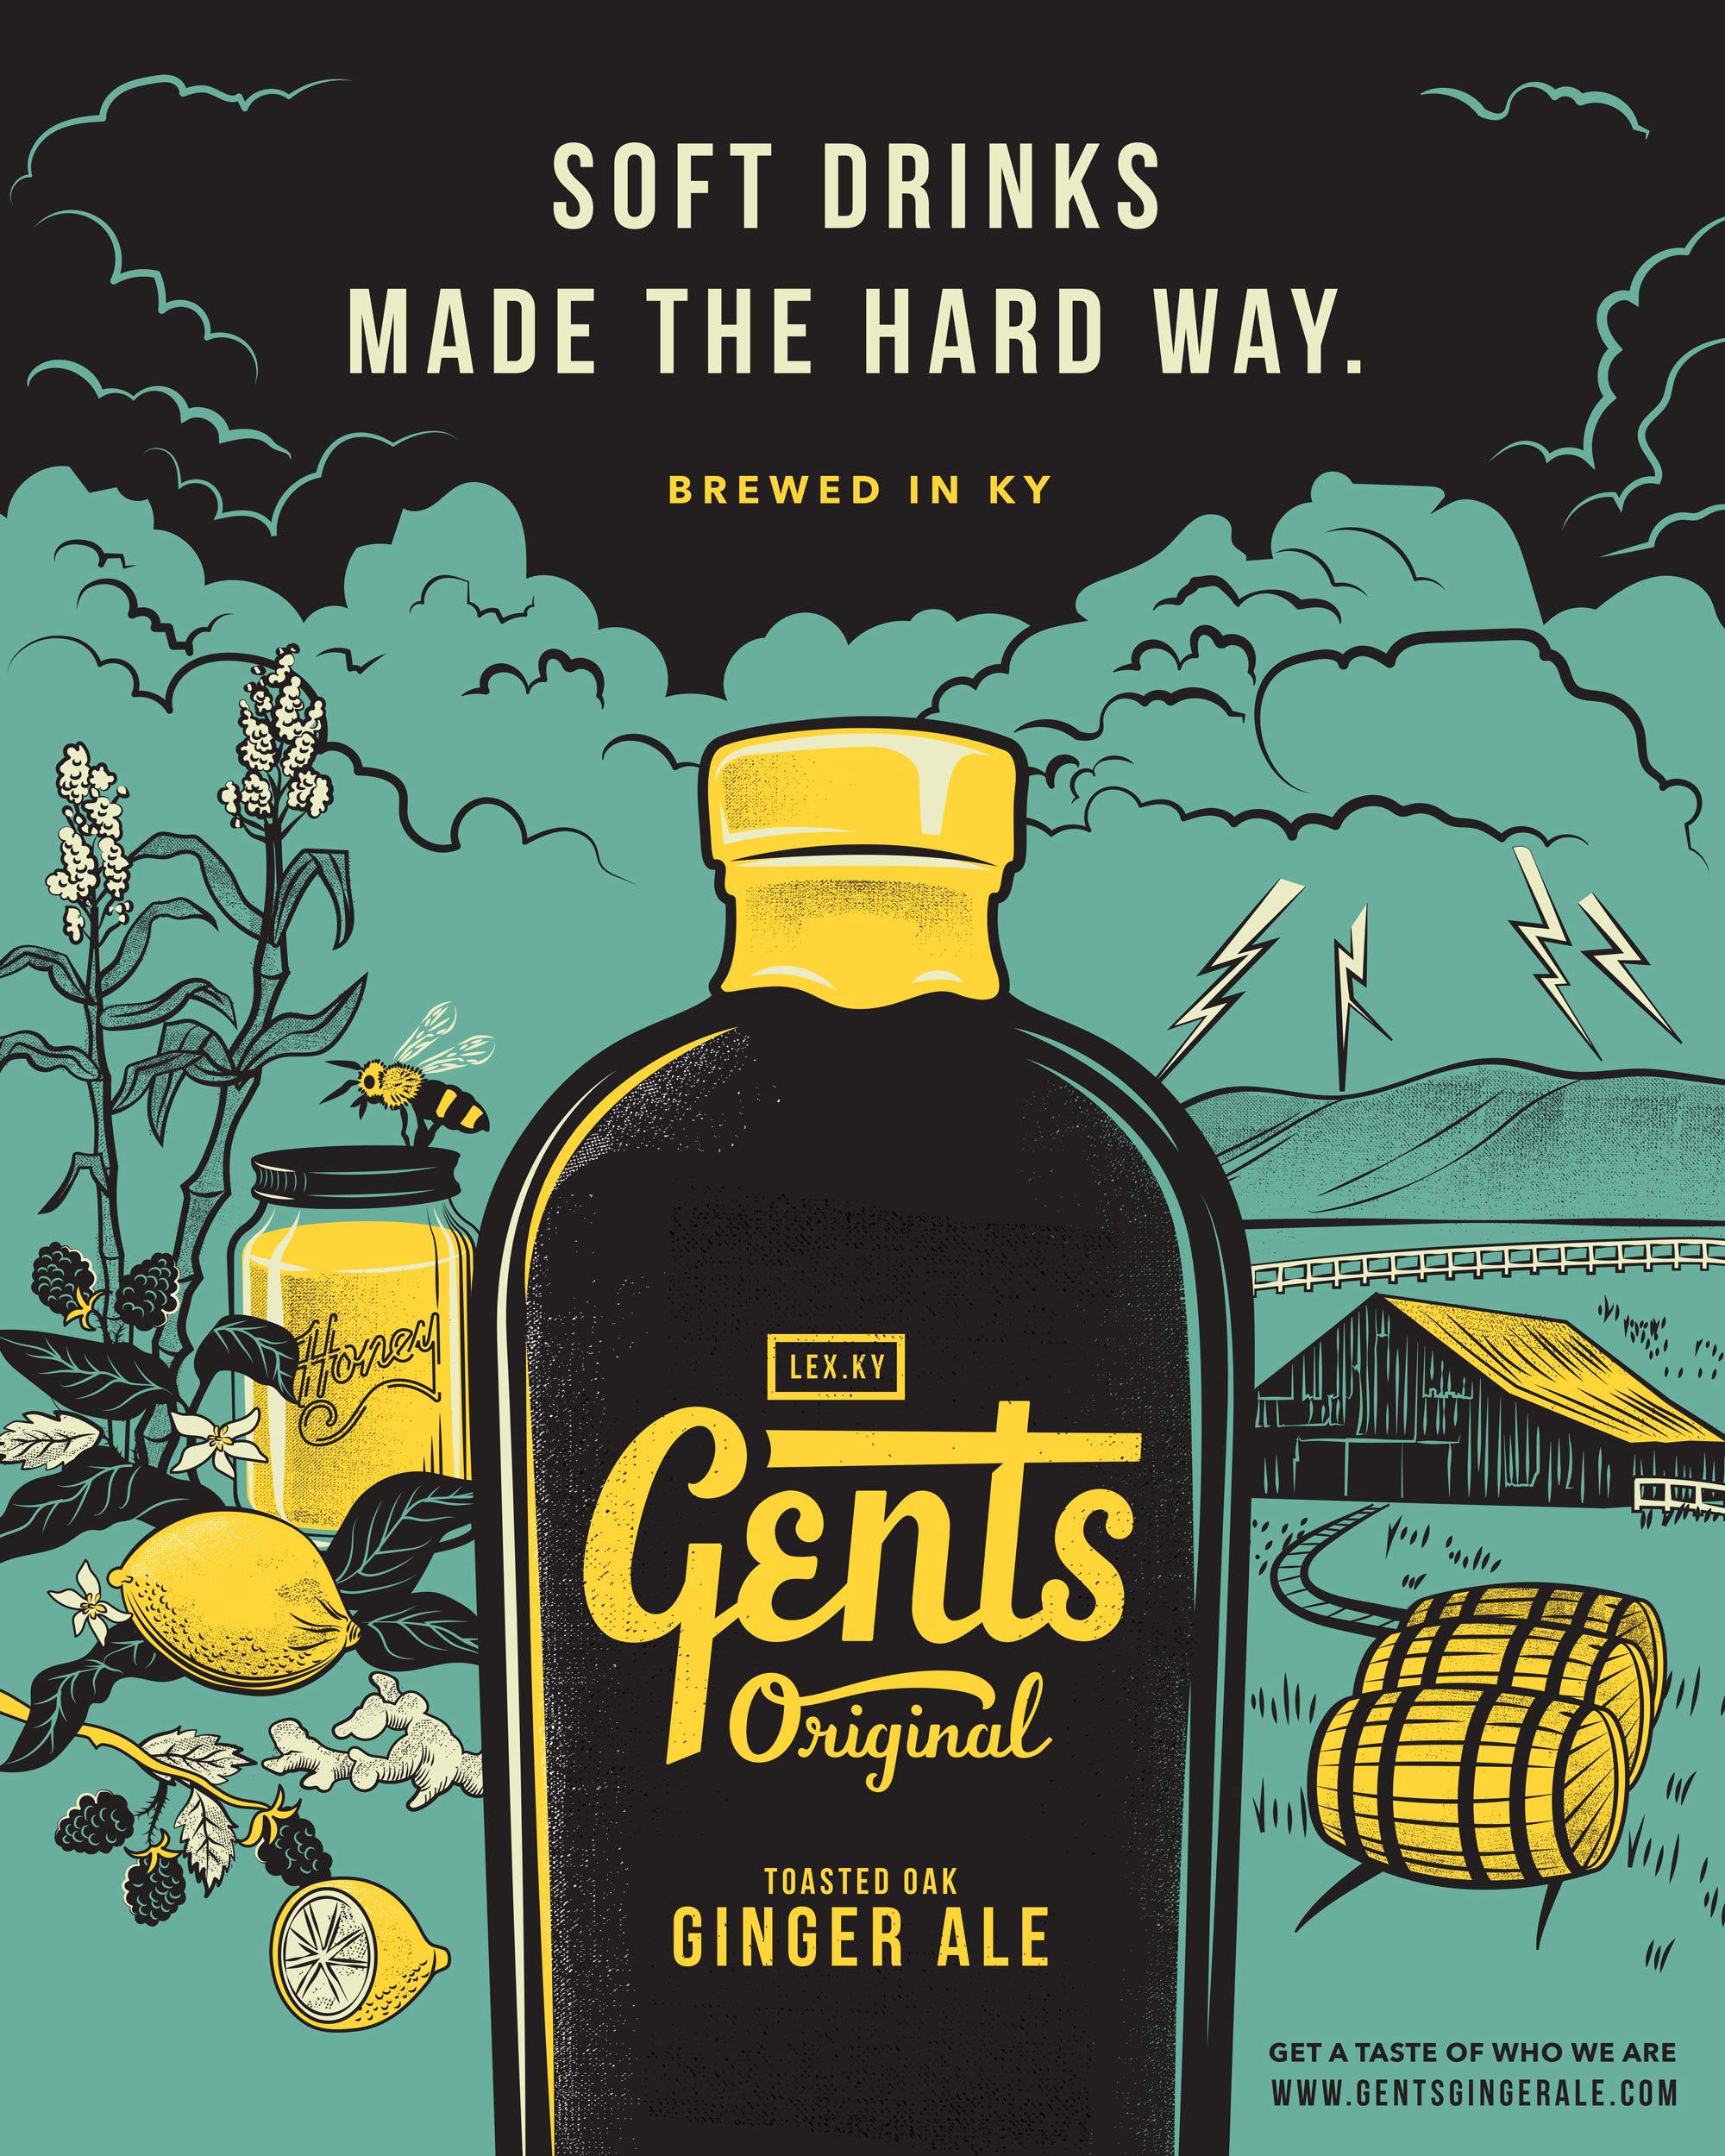 GENTS Ginger Ale illustrated poster showing a bottle, farm, and ingredients